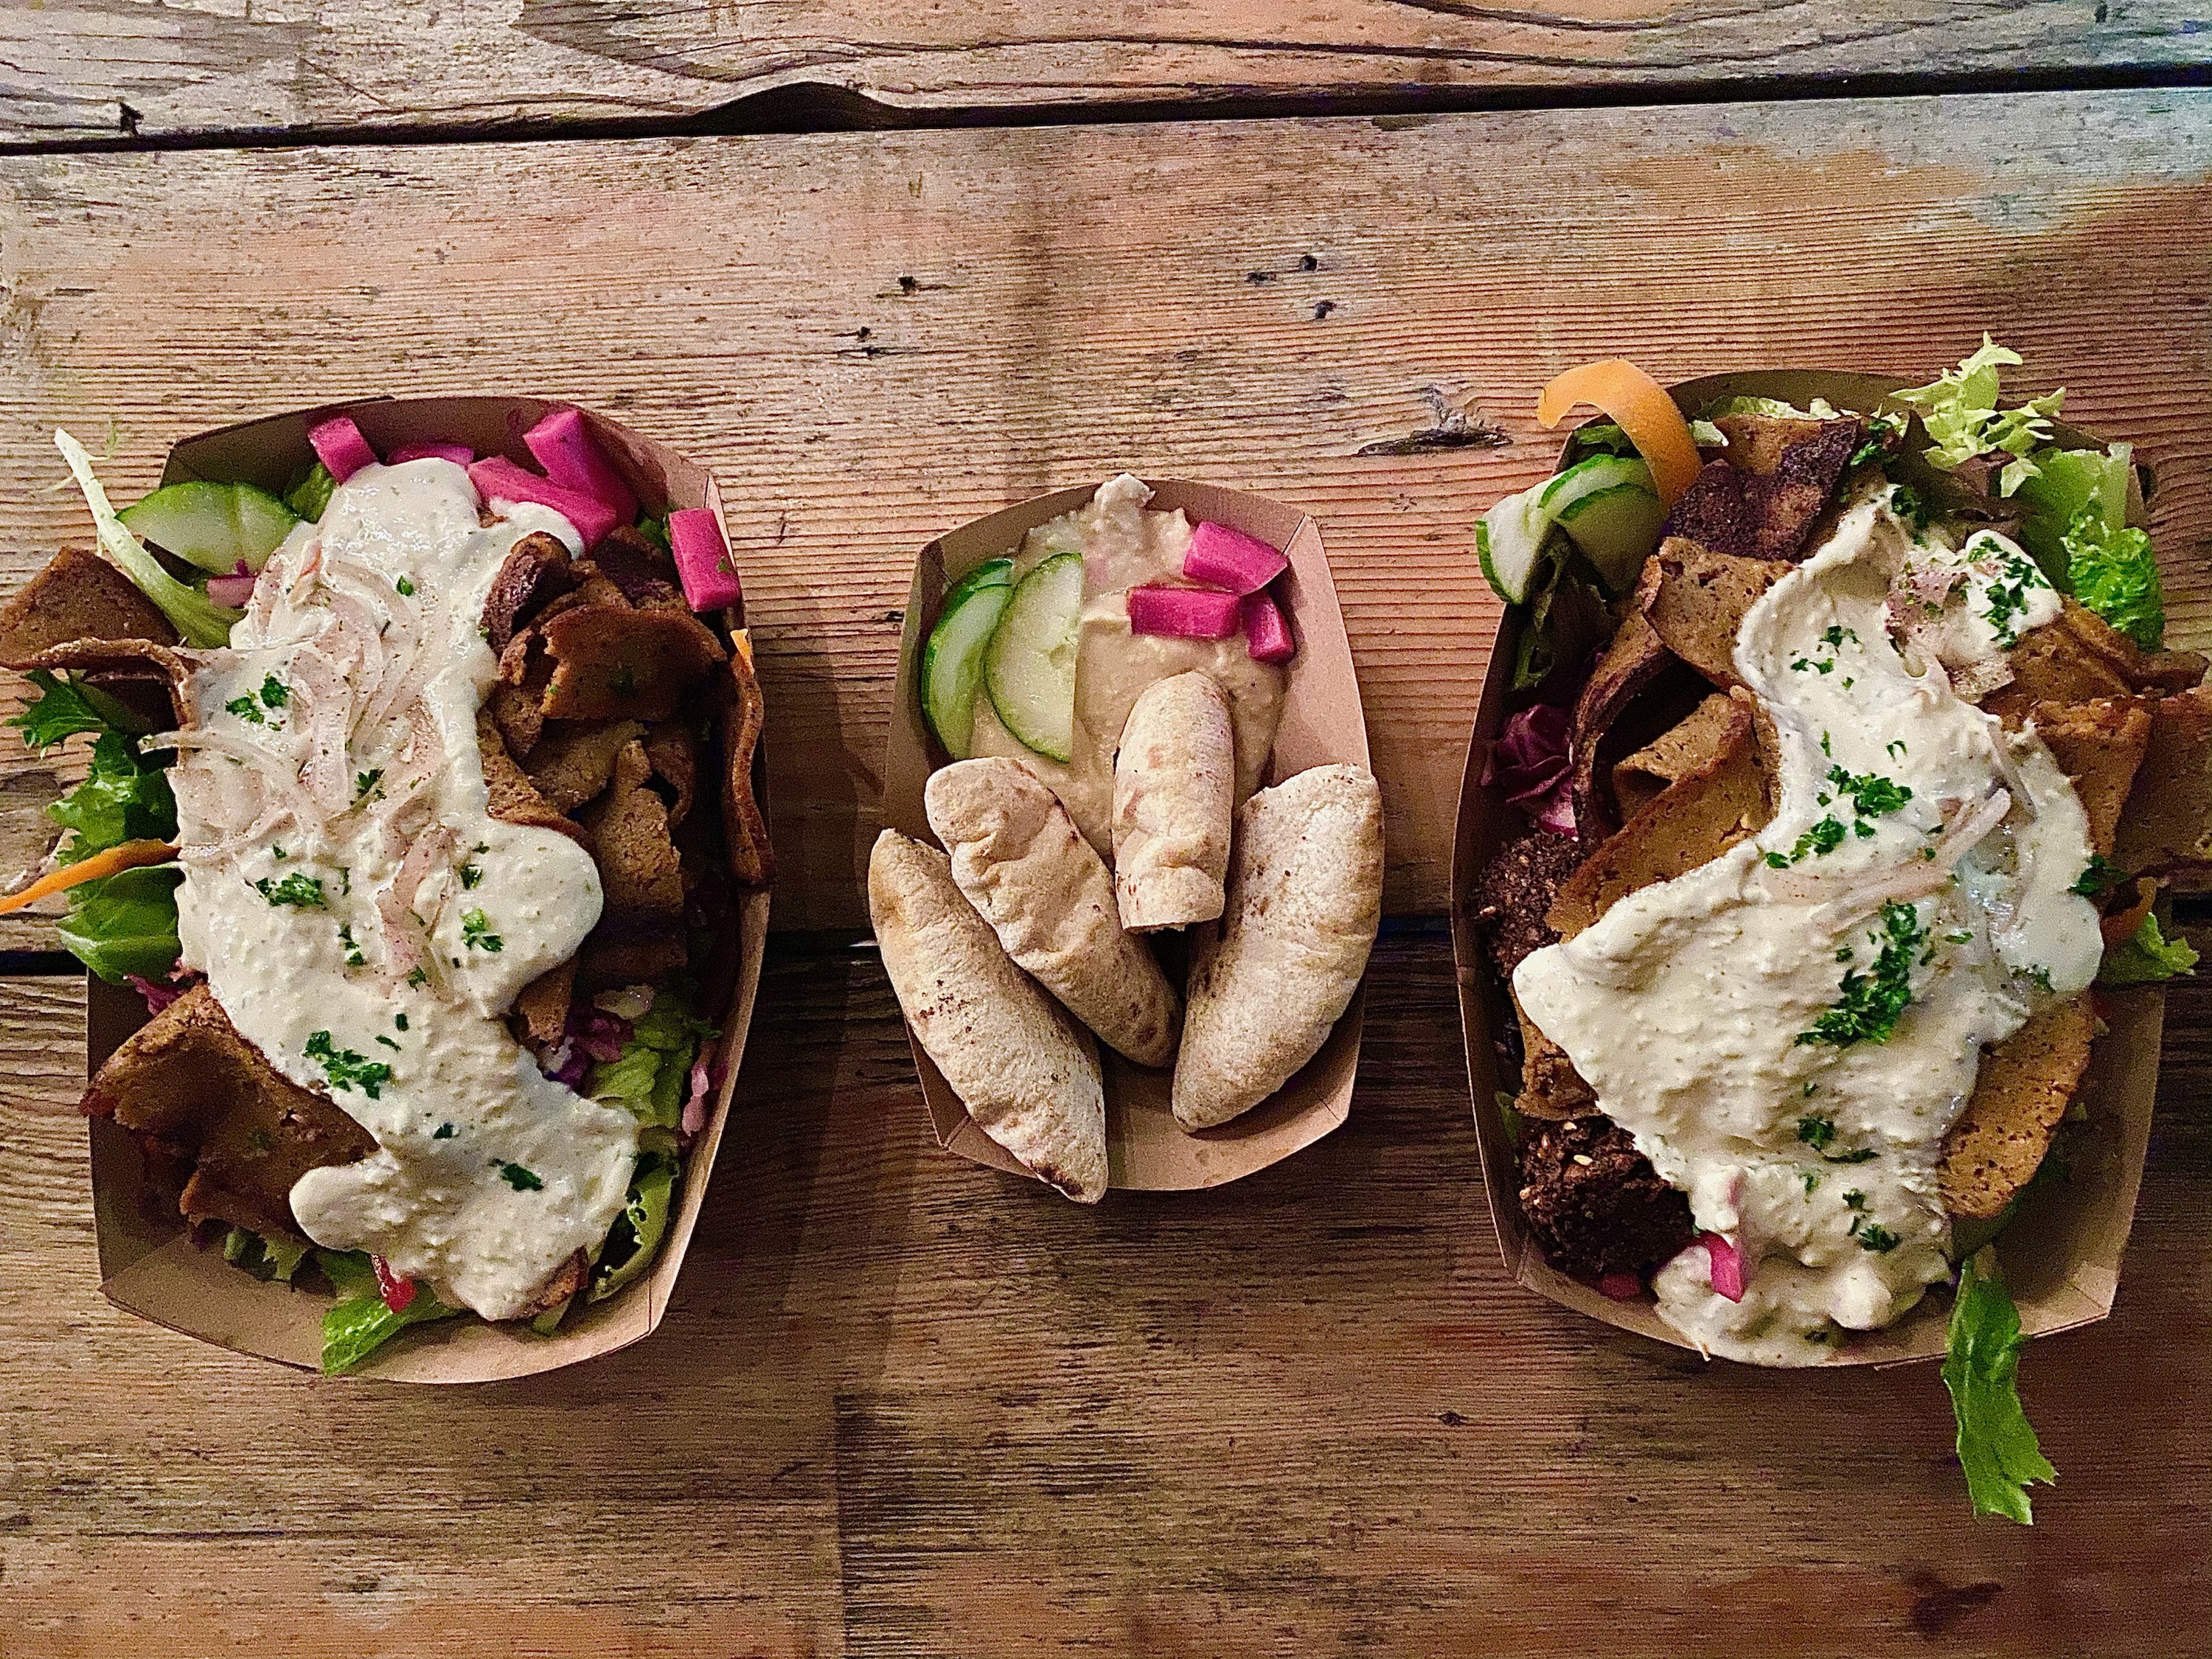 Three boats full of hummus, pita, and vegetables sit on a wood table